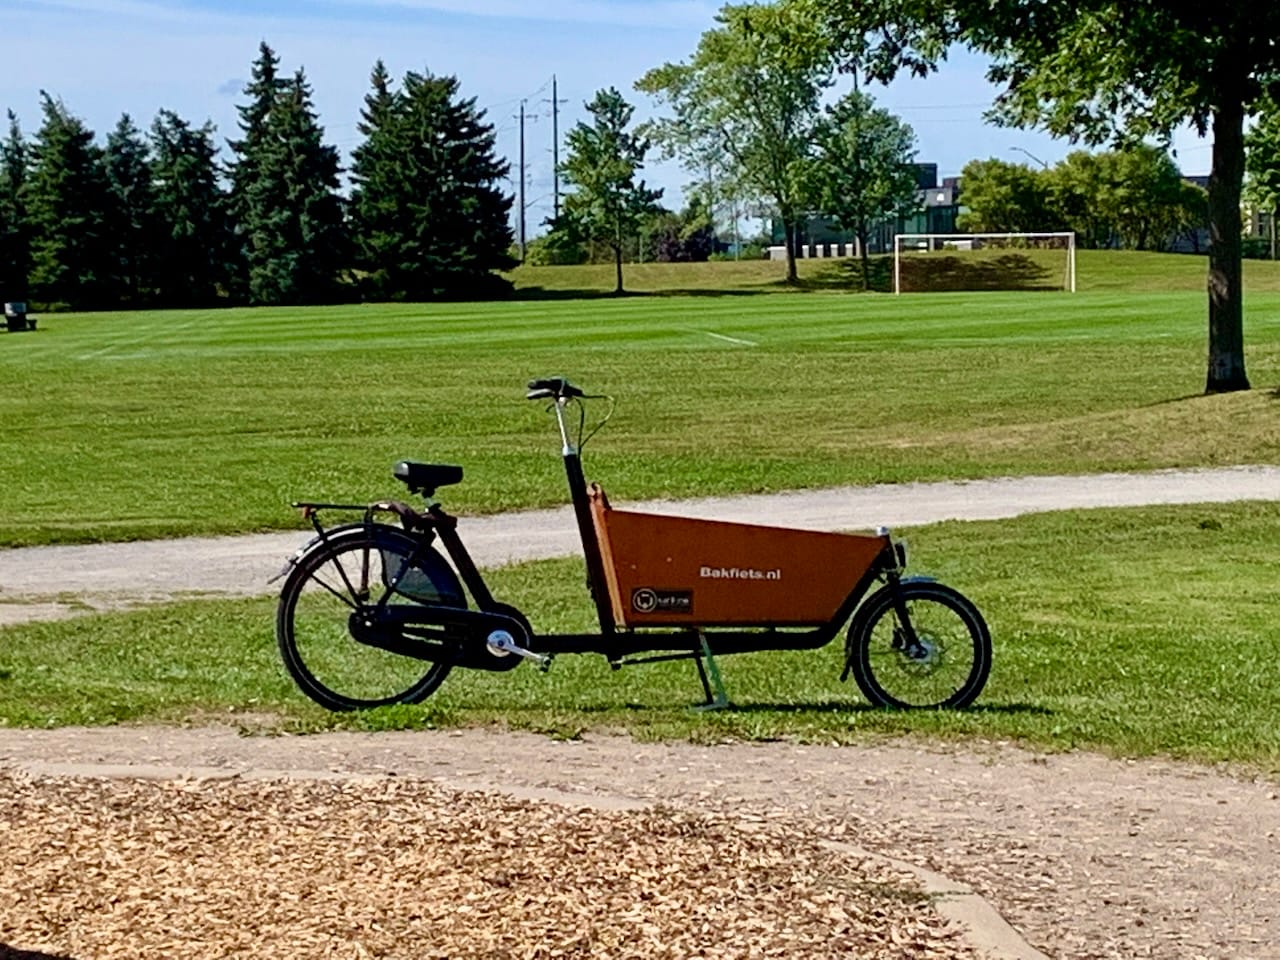 a bakfiets (Dutch cargo bike) parked in front of a soccer field